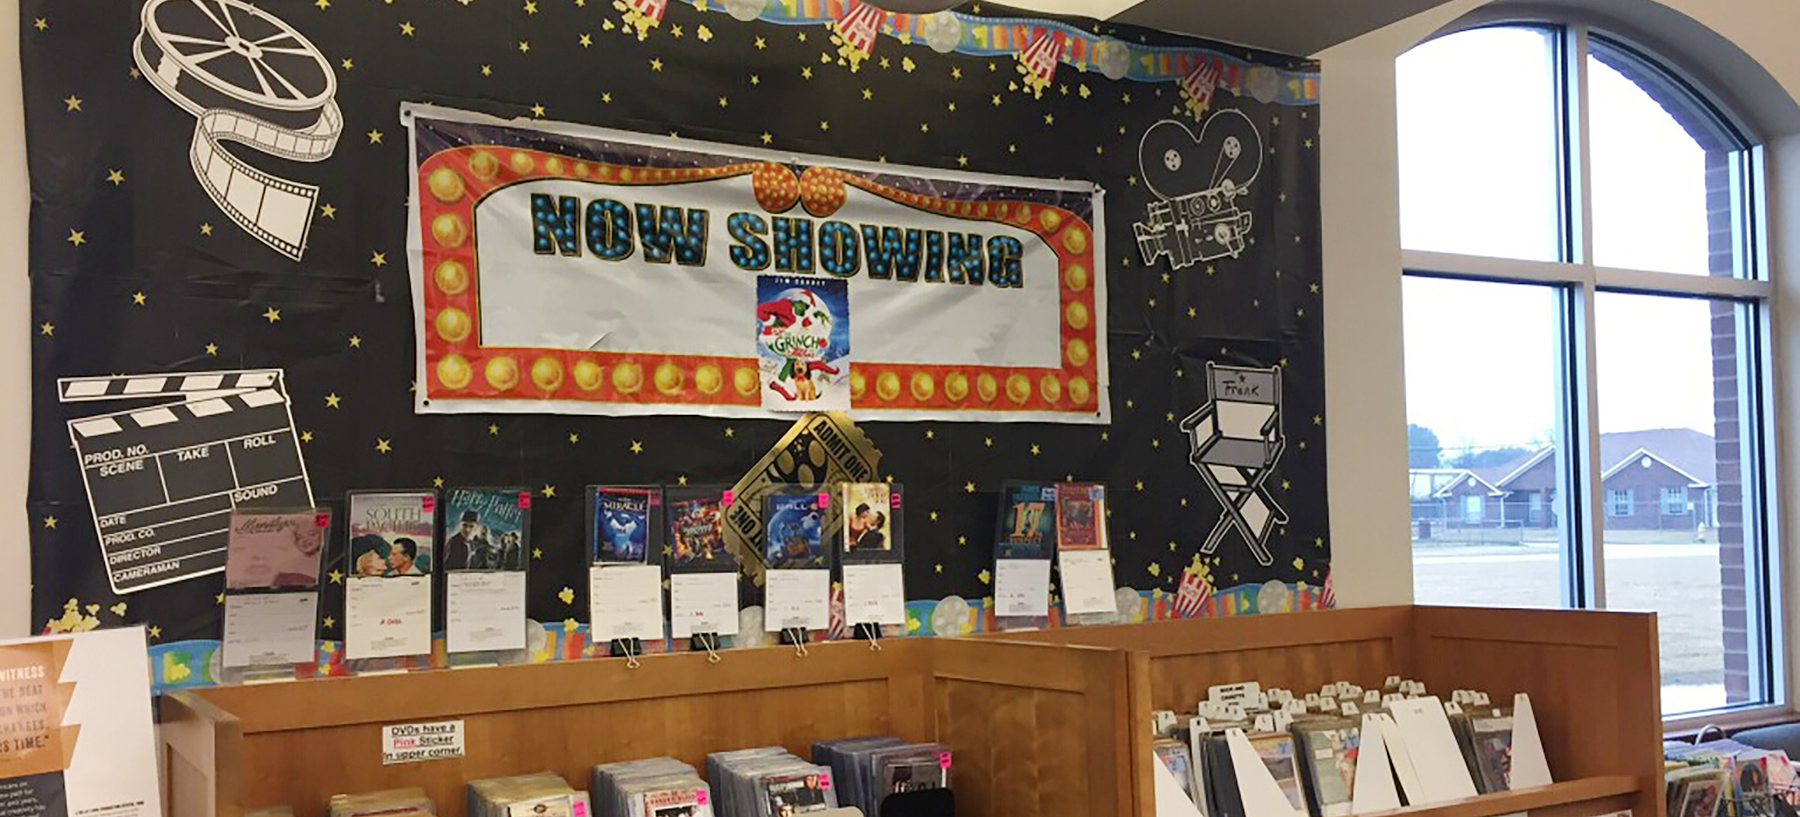 "Now Showing" display at Windsor Drive Branch